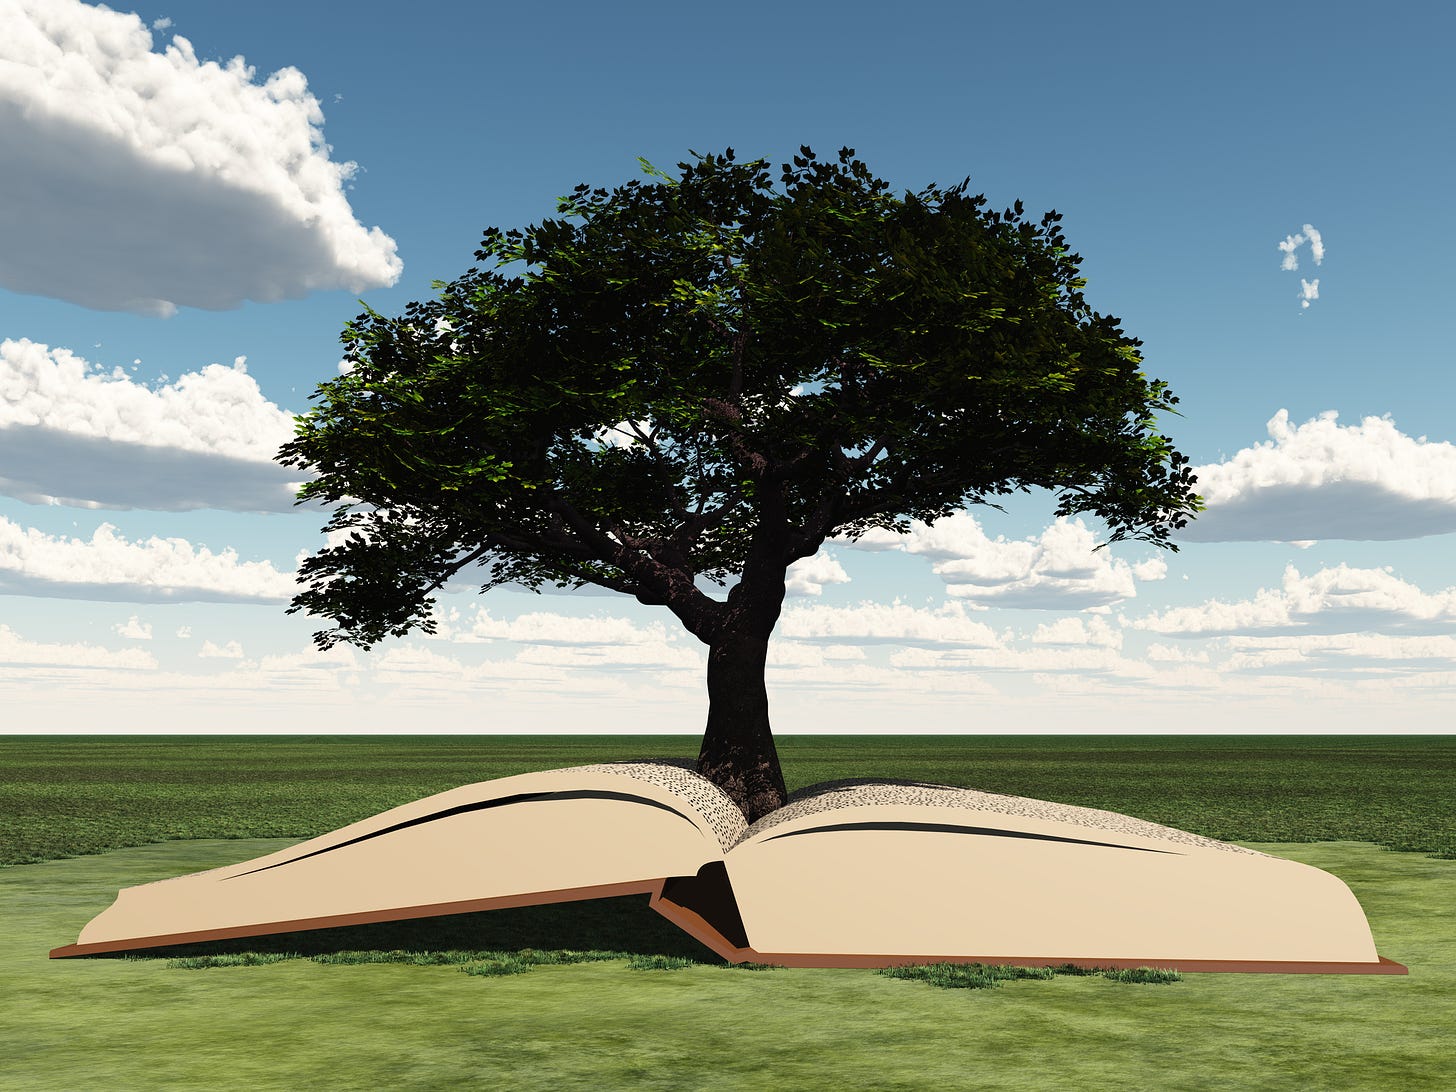 Tree coming out of a gigantic book